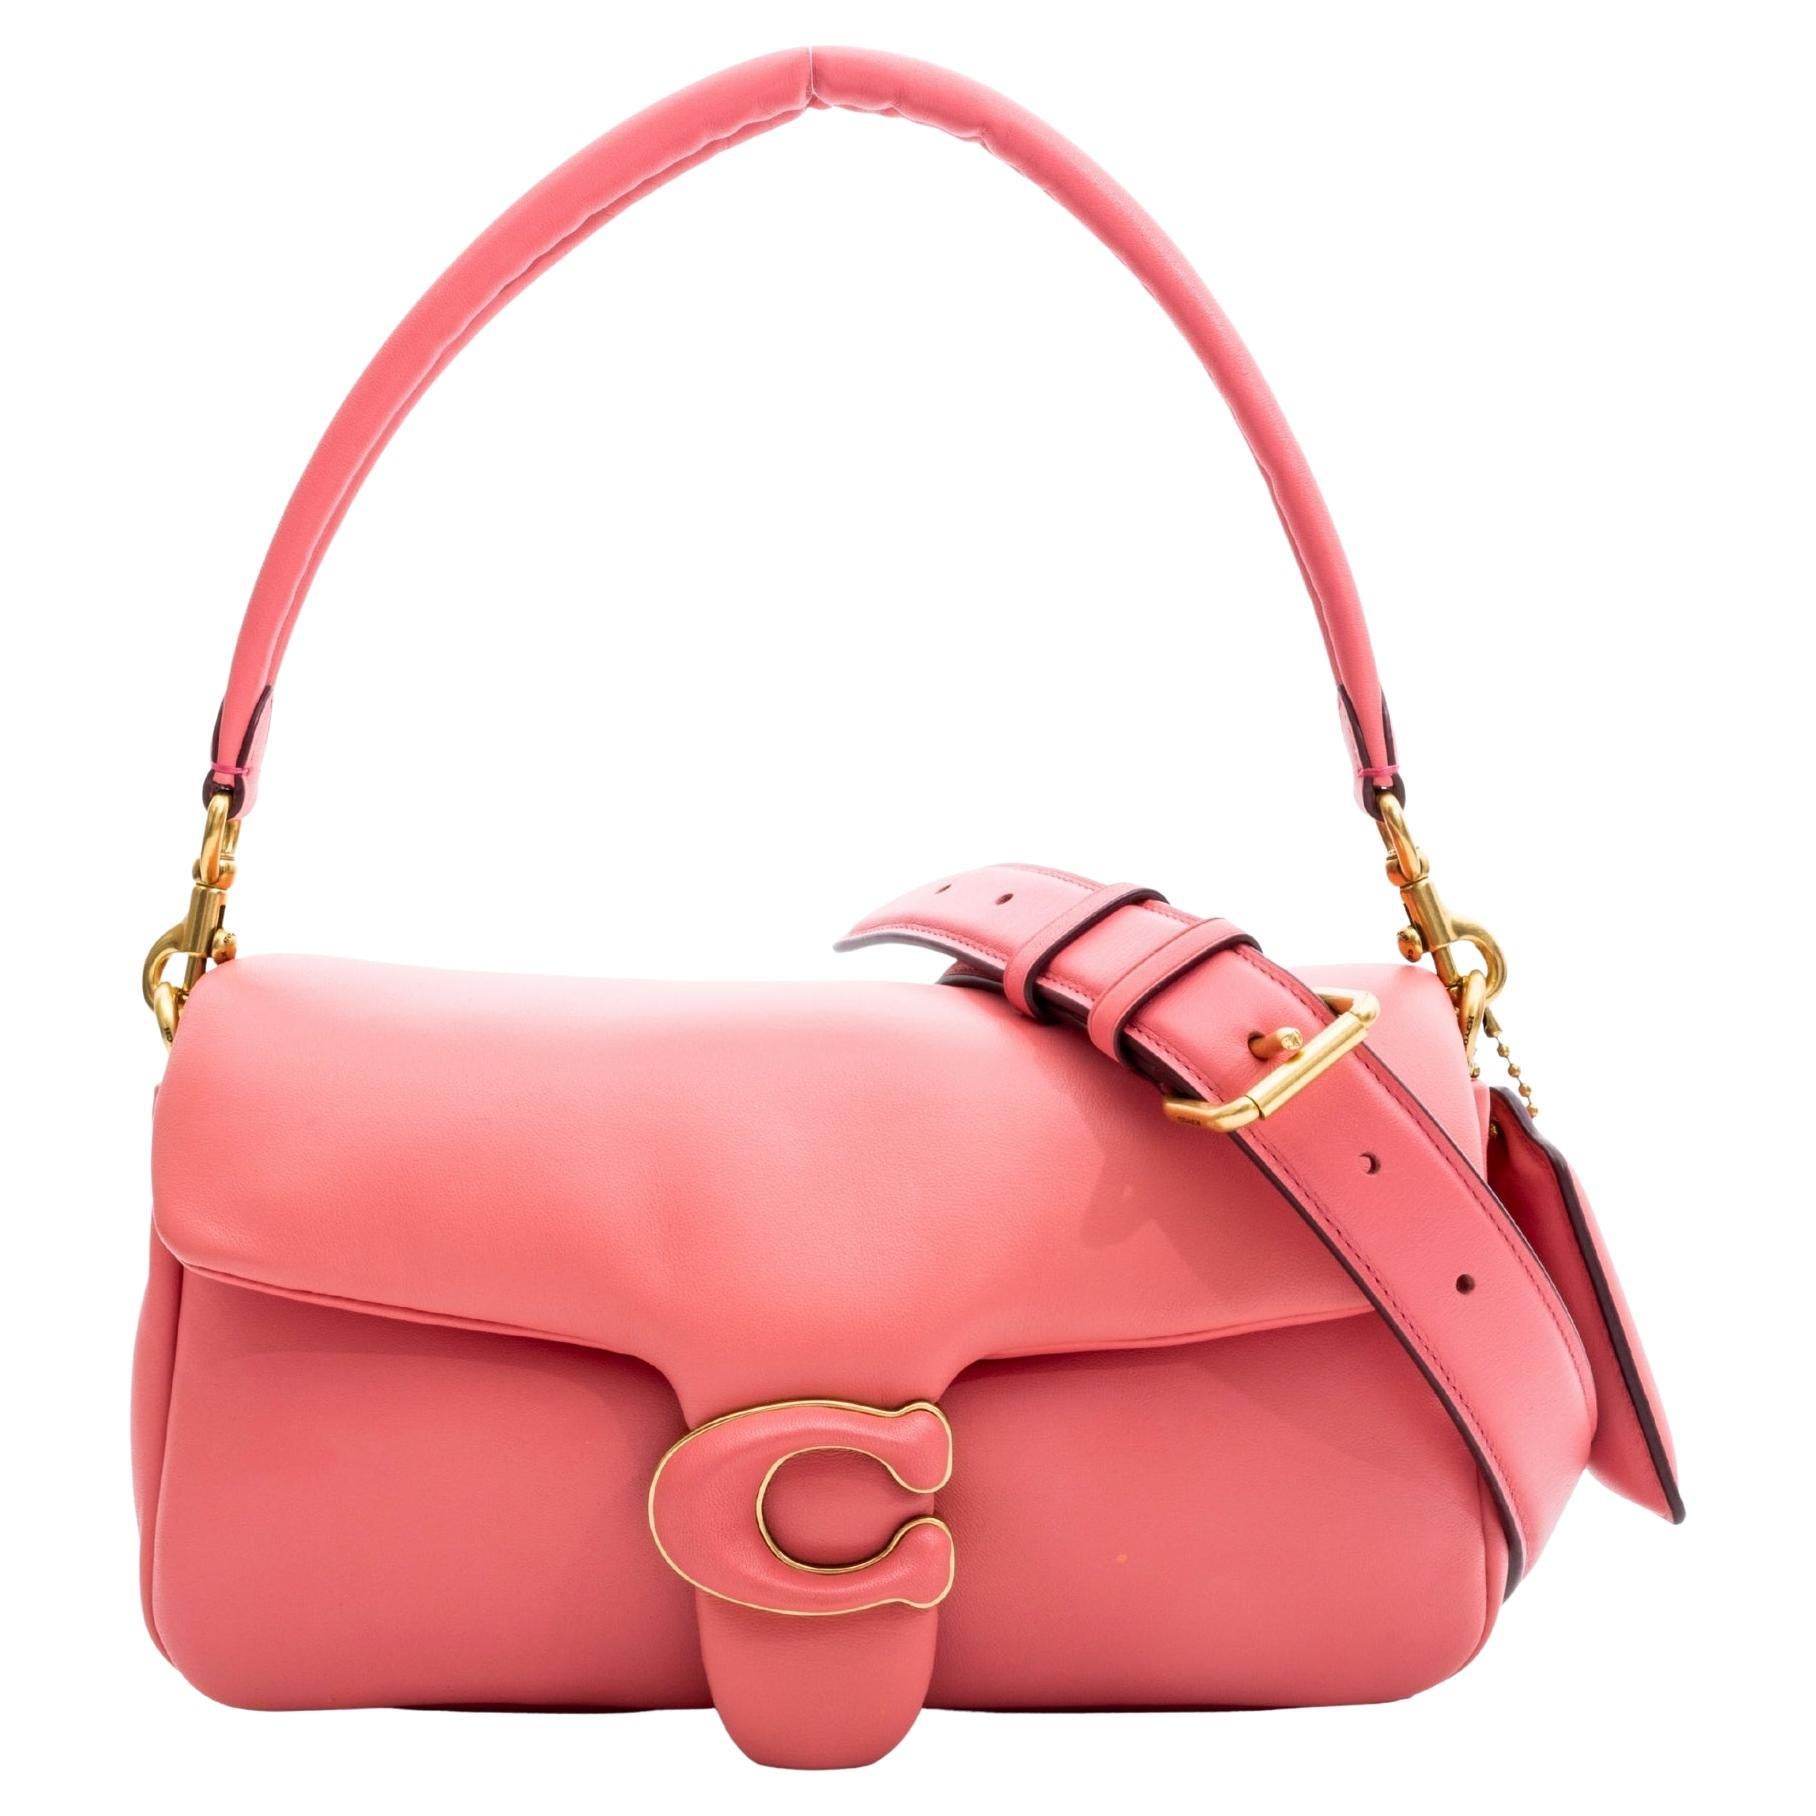 Coach Pink Leather Pillow Tabby Shoulder Bag For Sale